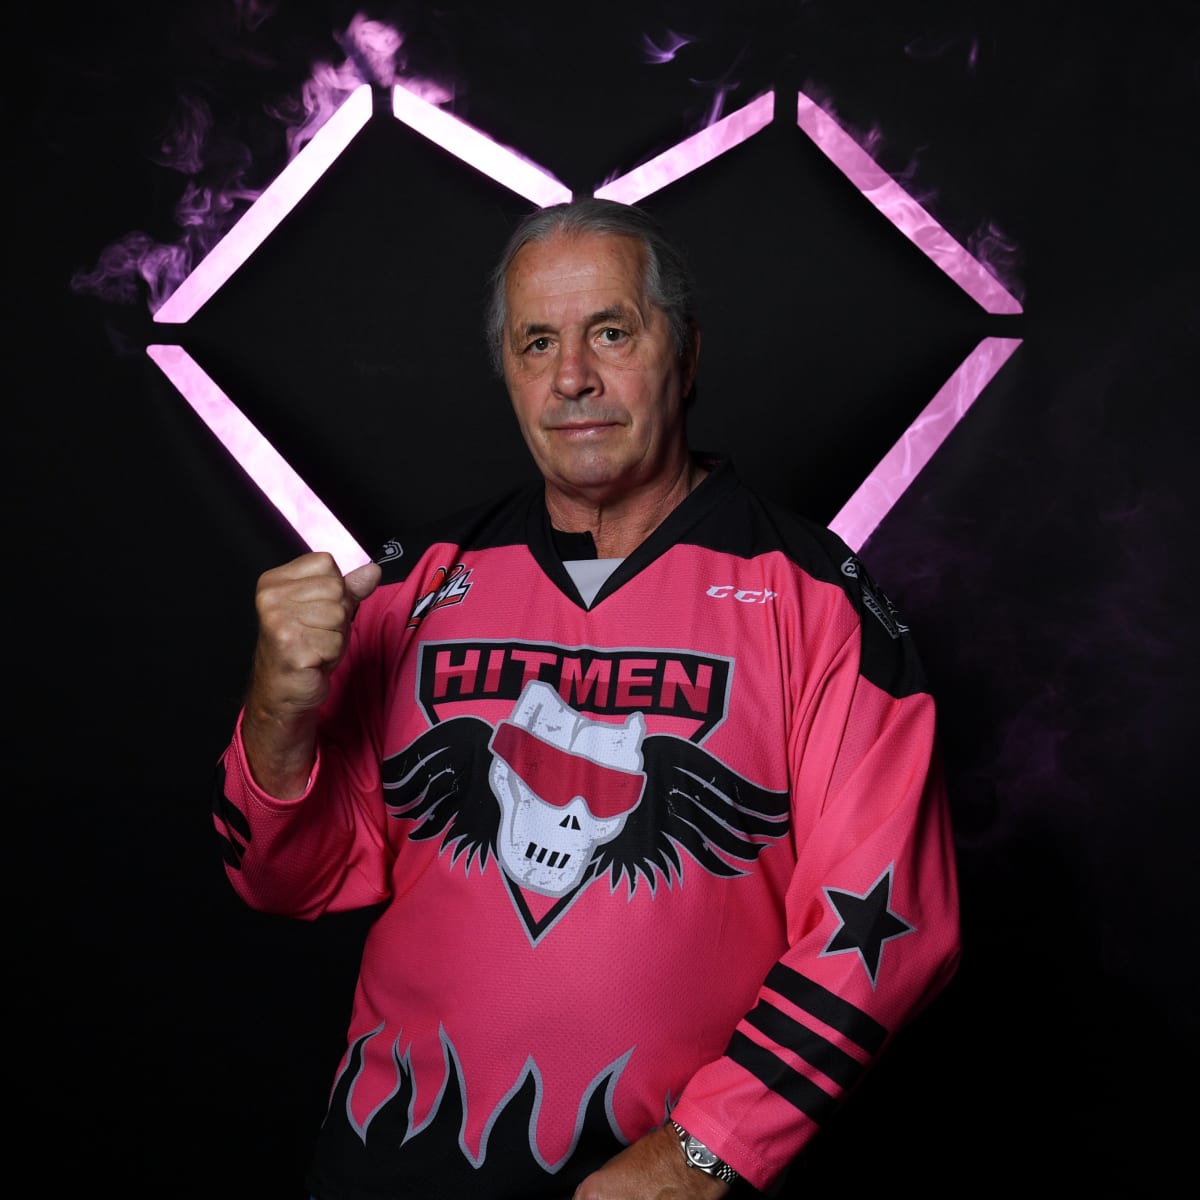 Prostate Cancer Centre - On Saturday, November 2nd, the Official Calgary  Hitmen Hockey Club are proud to wear for one game only - a special jersey  designed to honour Bret Hart! After